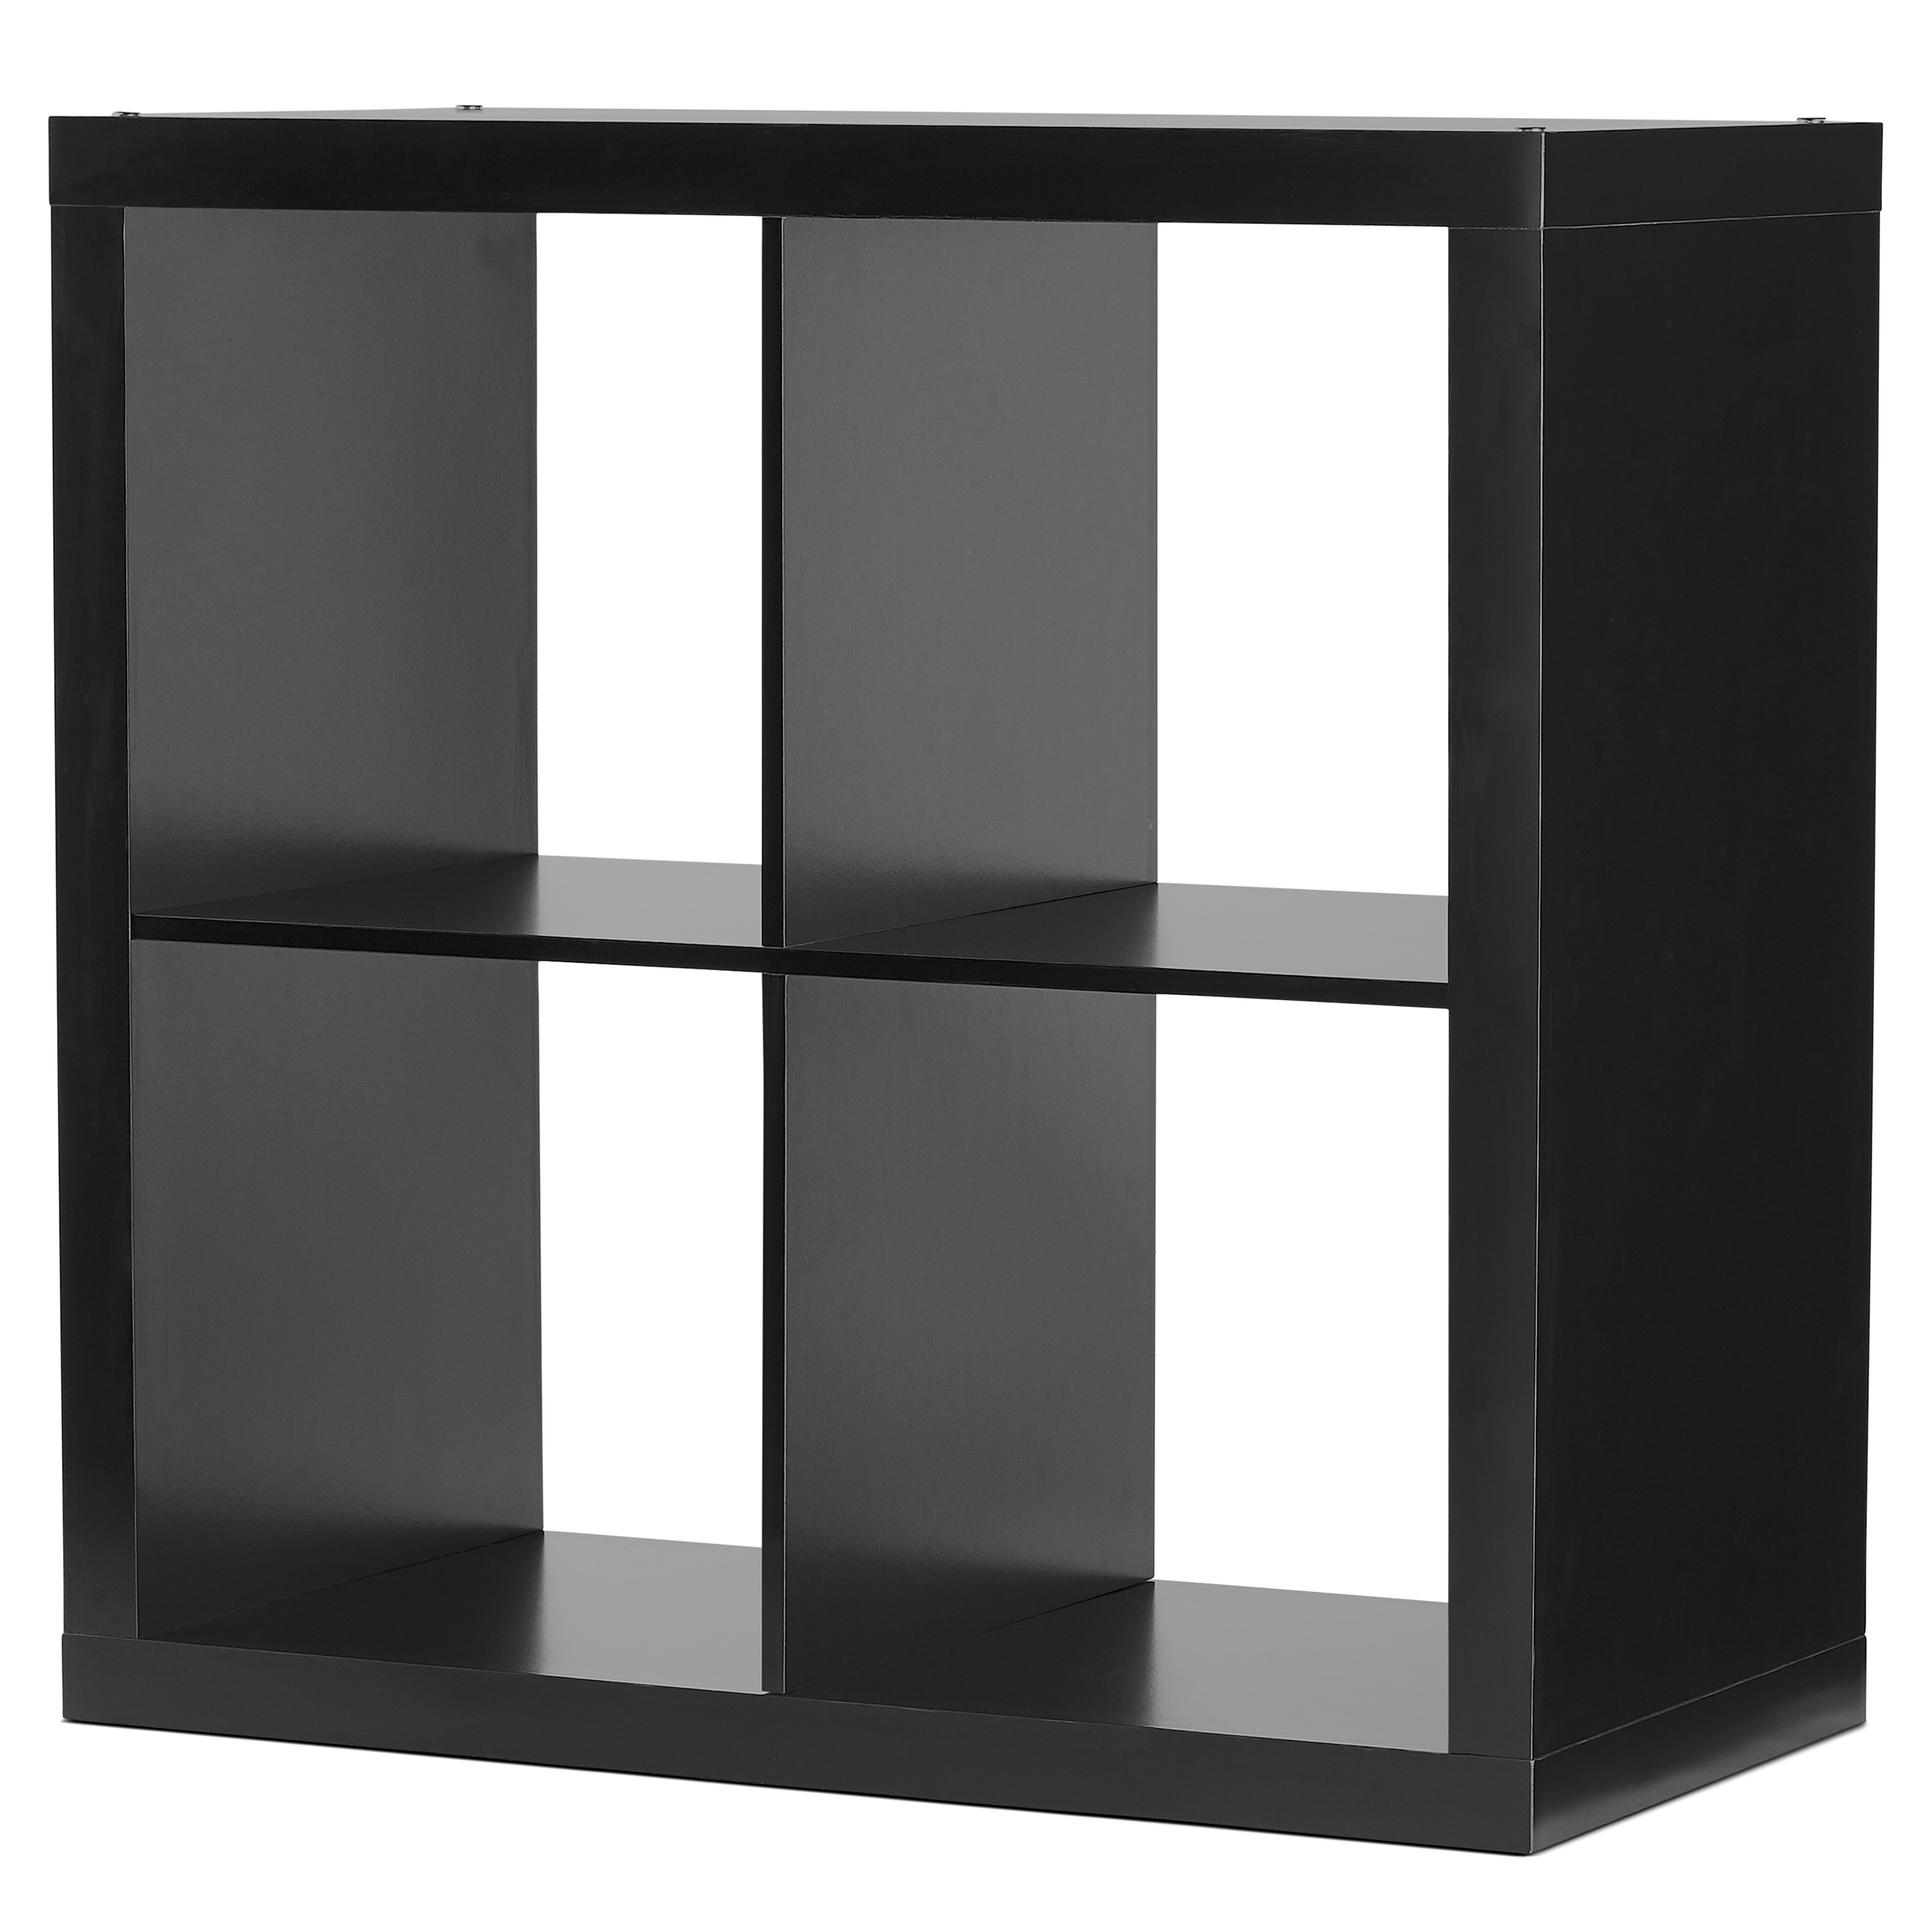 Better Homes & Gardens 4-Cube Storage Organizer, Solid Black - image 3 of 10